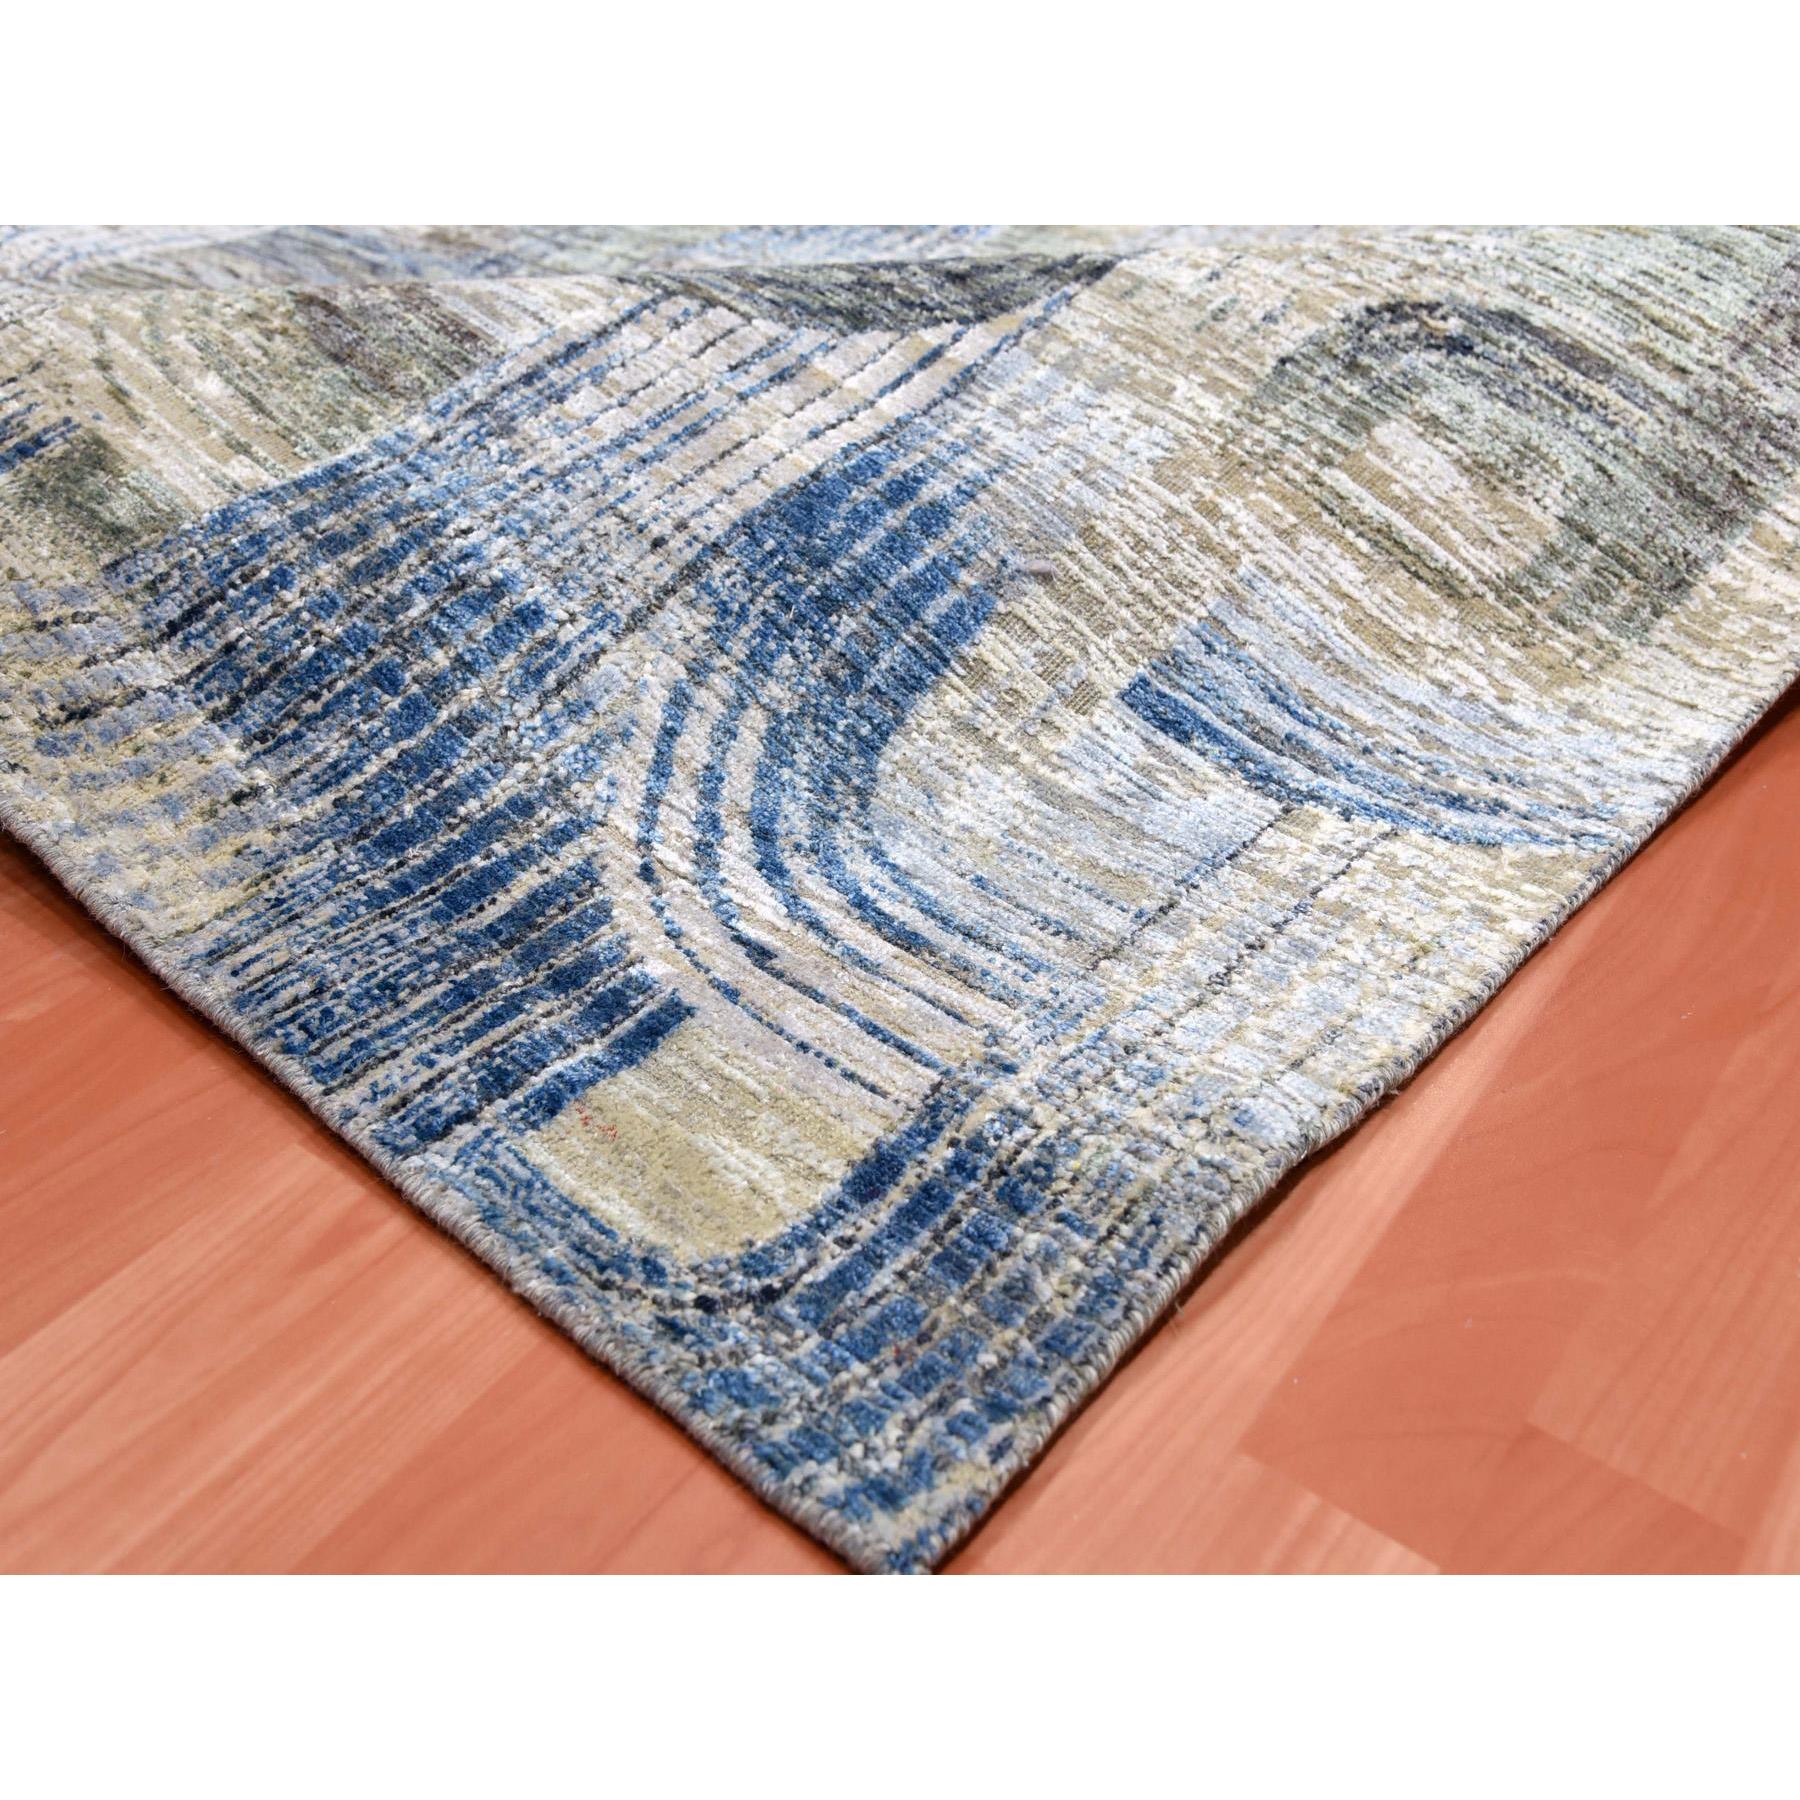 6'x9' THE INTERTWINED PASSAGE, Hand Woven, Silk with Textured Wool, Oriental Rug 